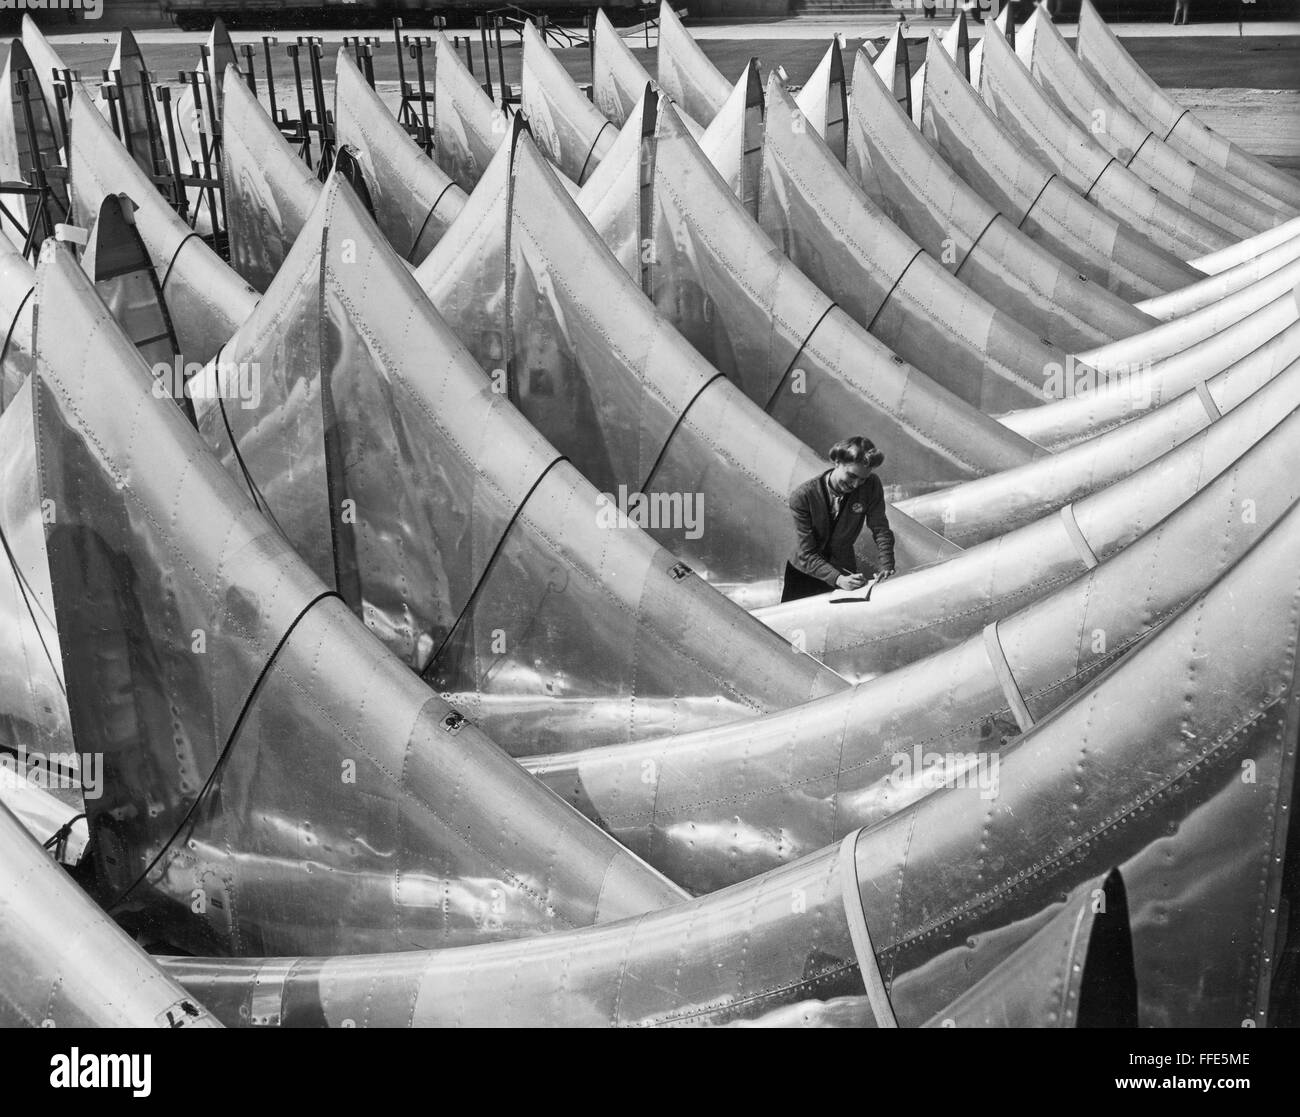 WORLD WAR II: AIRCRAFT. /nDorsal fins for Boeing B-29 superfortress bomber aircrafts in the Boeing plant at Renton, Washington, c1944. Stock Photo